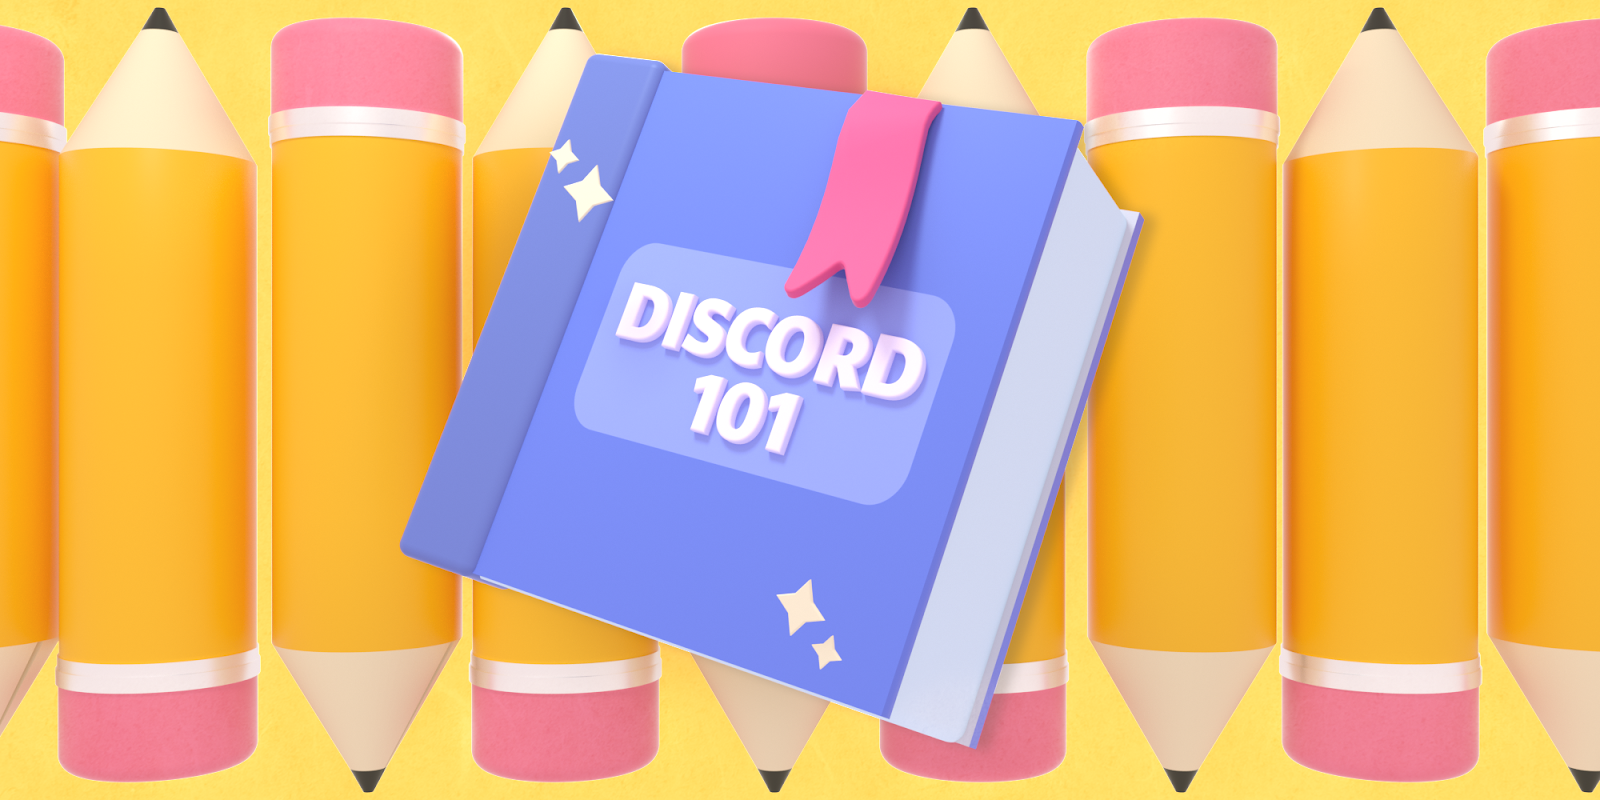 Traduction « How to use Discord for your classroom » image de couverture